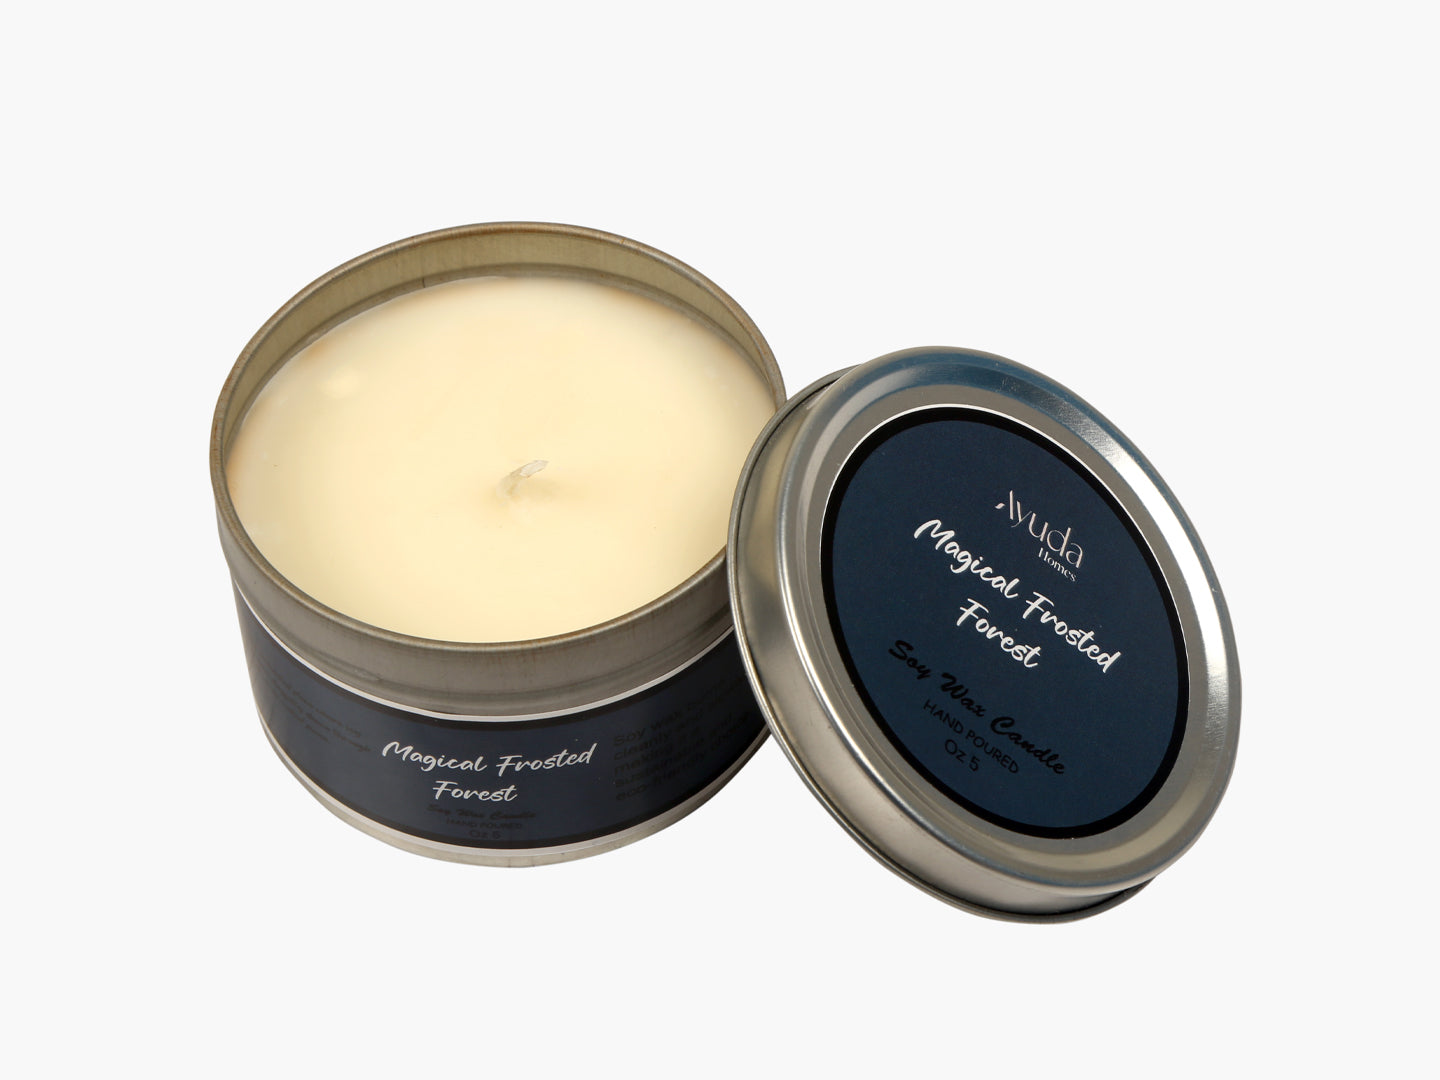 Magical Frosted Forest Scented Candle - Soy Wax | Tin Jar - Ayuda Homes